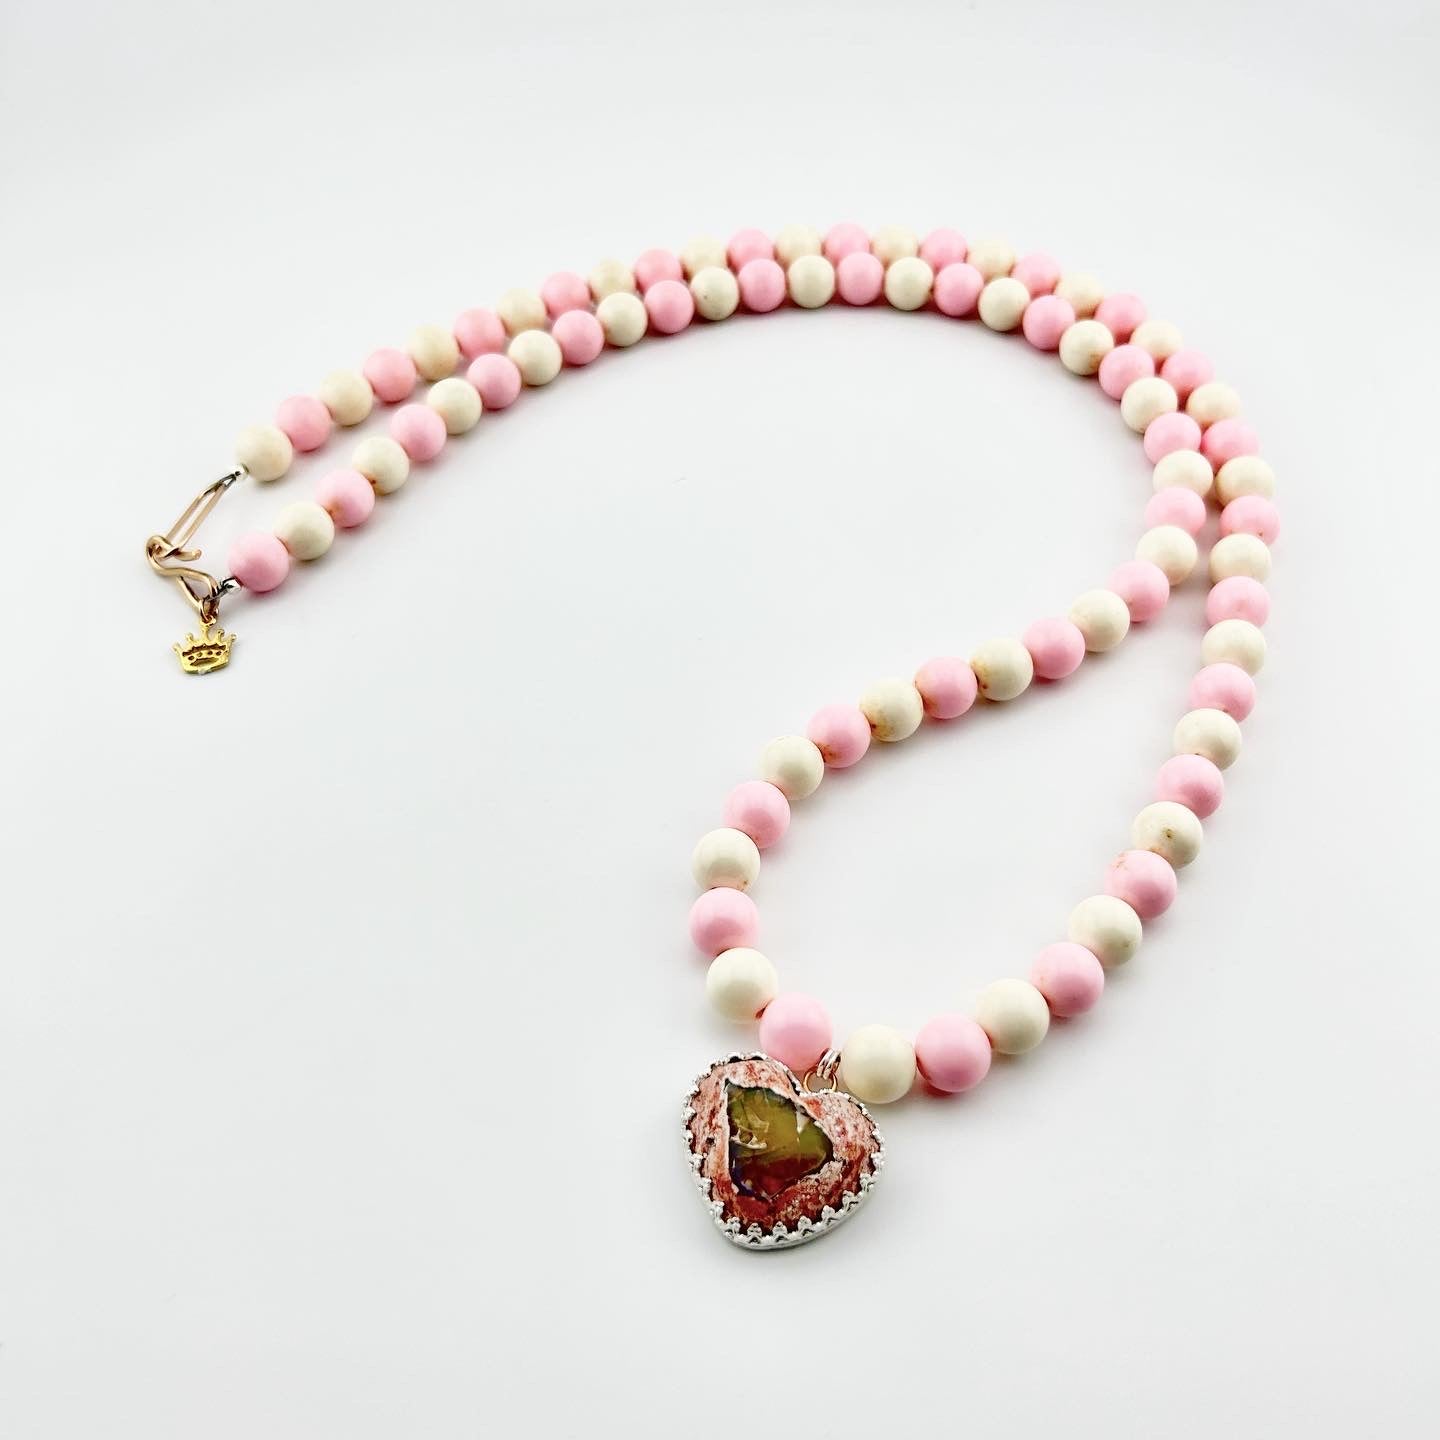 Barbie Necklace - Fire Opal Heart with Pink and White Vintage Beads - Jennifer Cervelli Jewelry